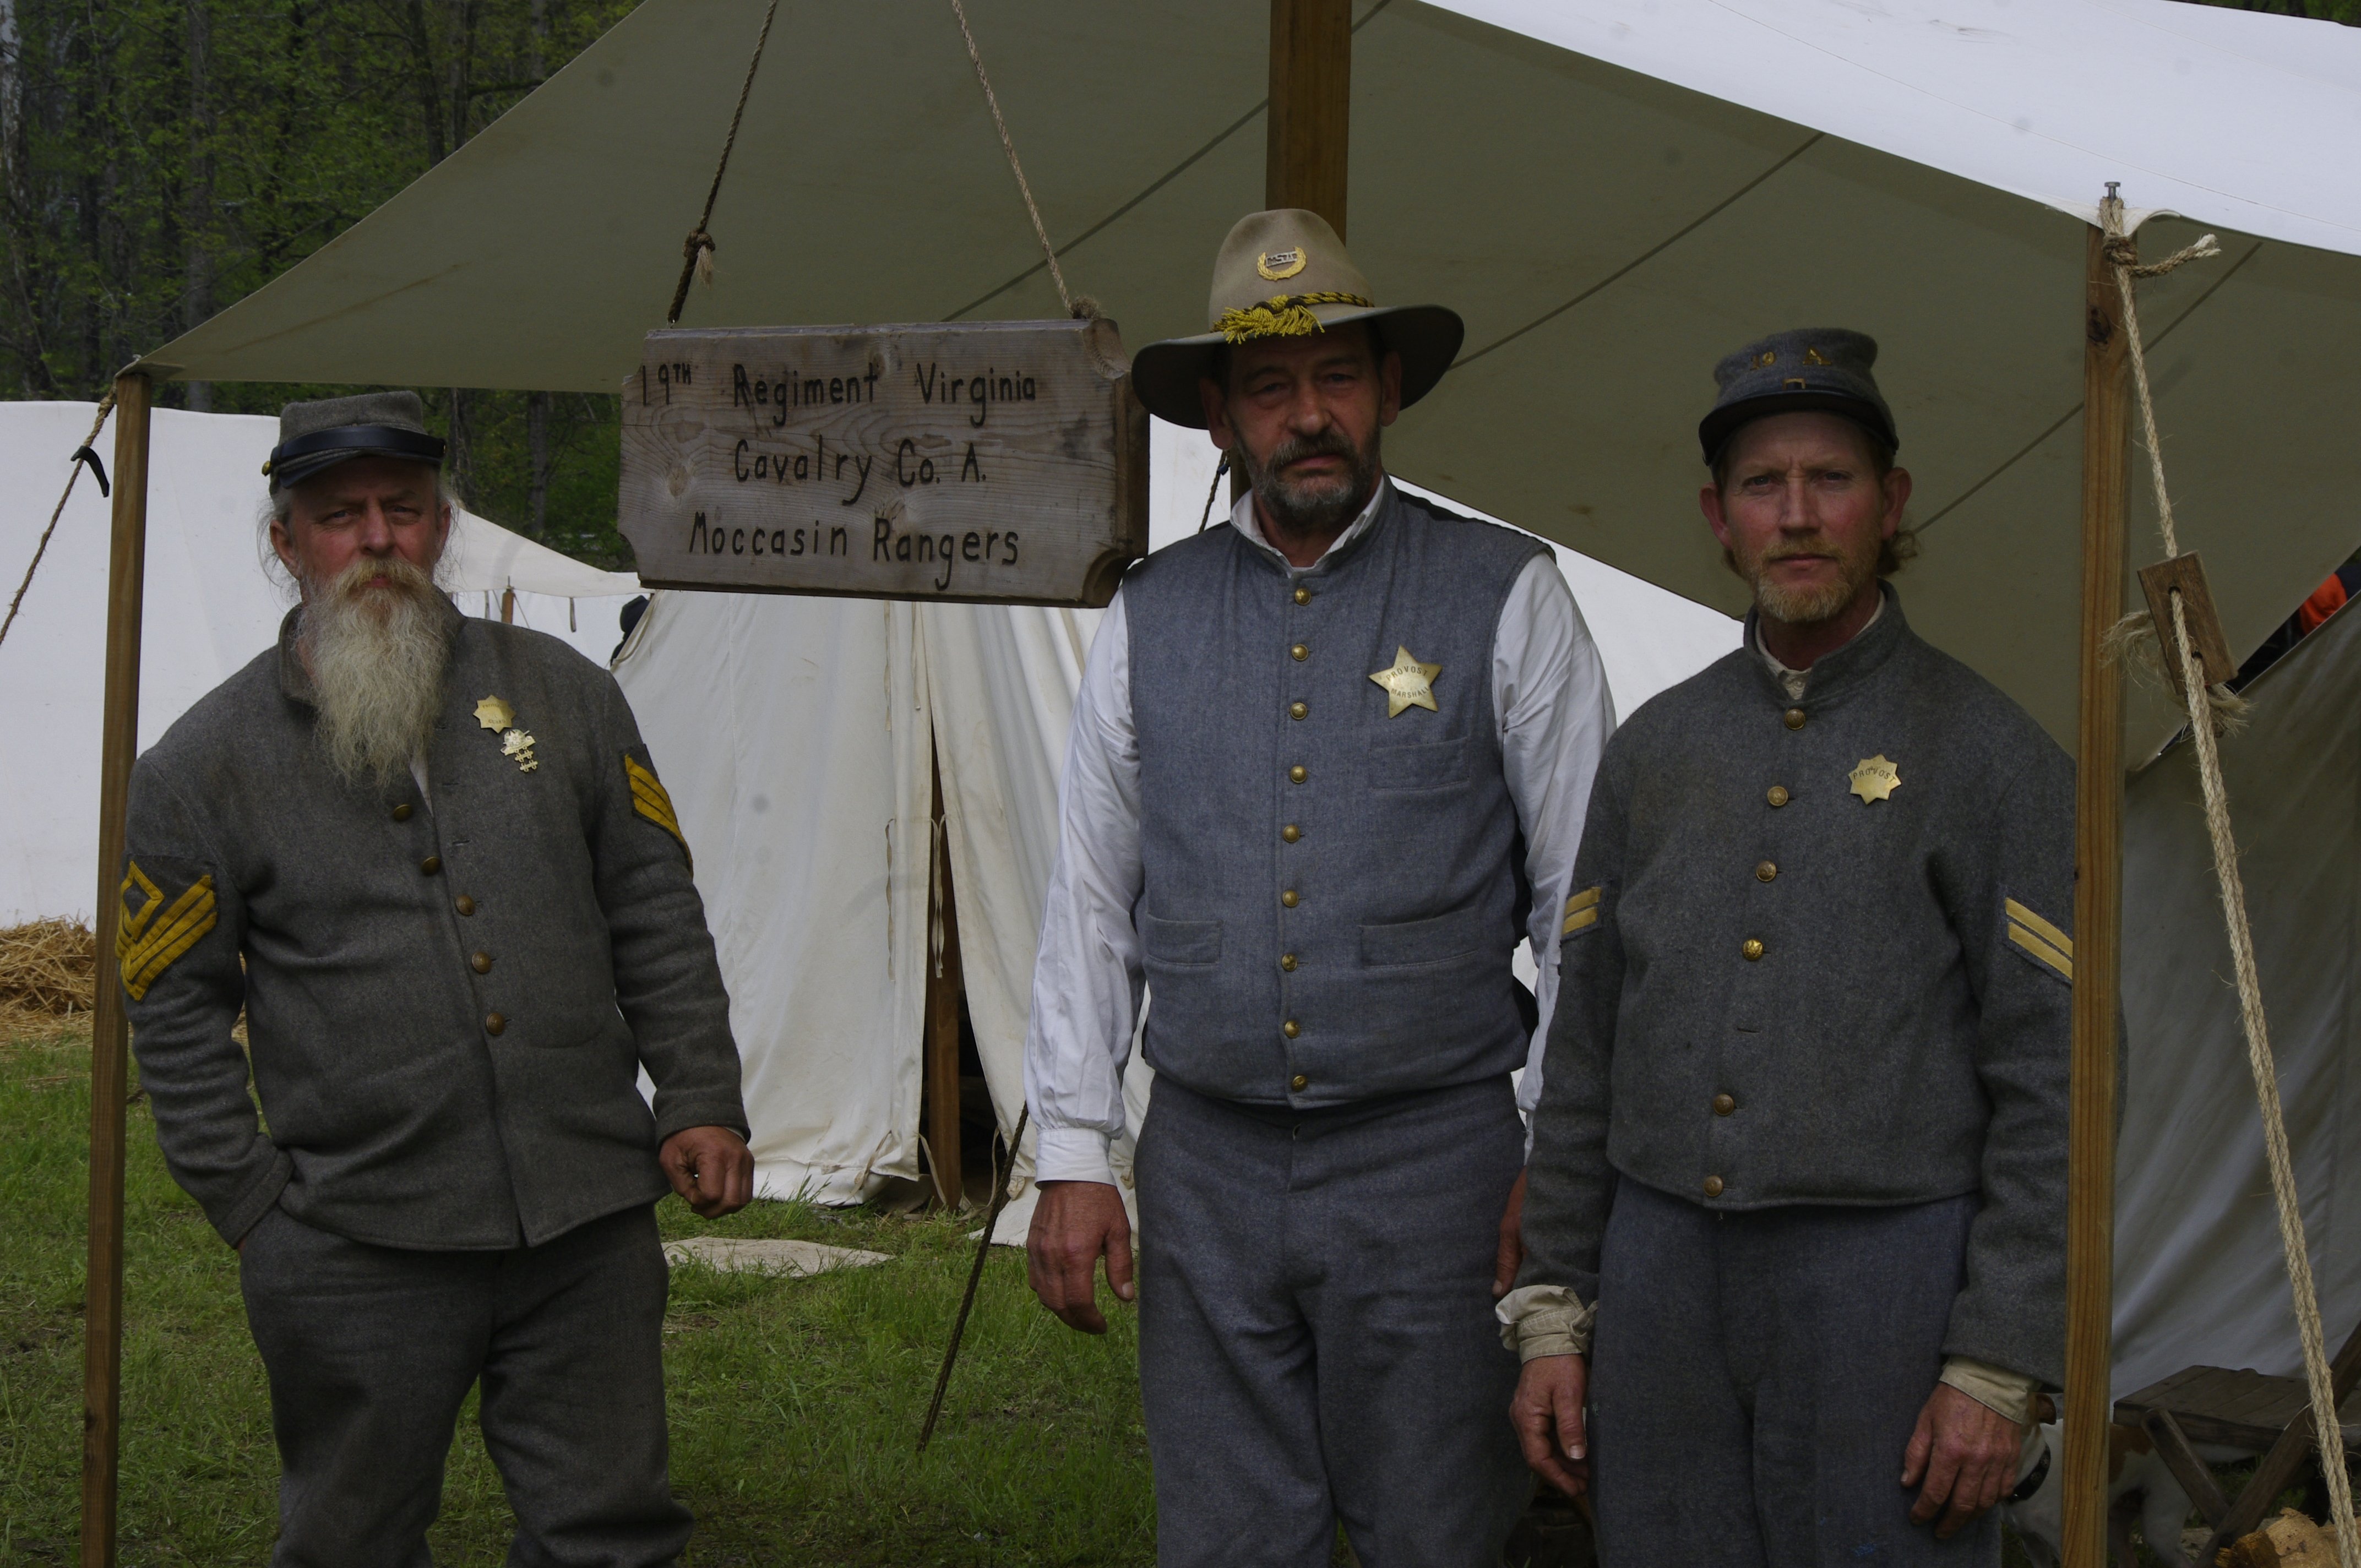 A group of reenactors portraying the Moccasin Rangers, a notorious group of bushwhackers that operated in West Virginia throughout the war.